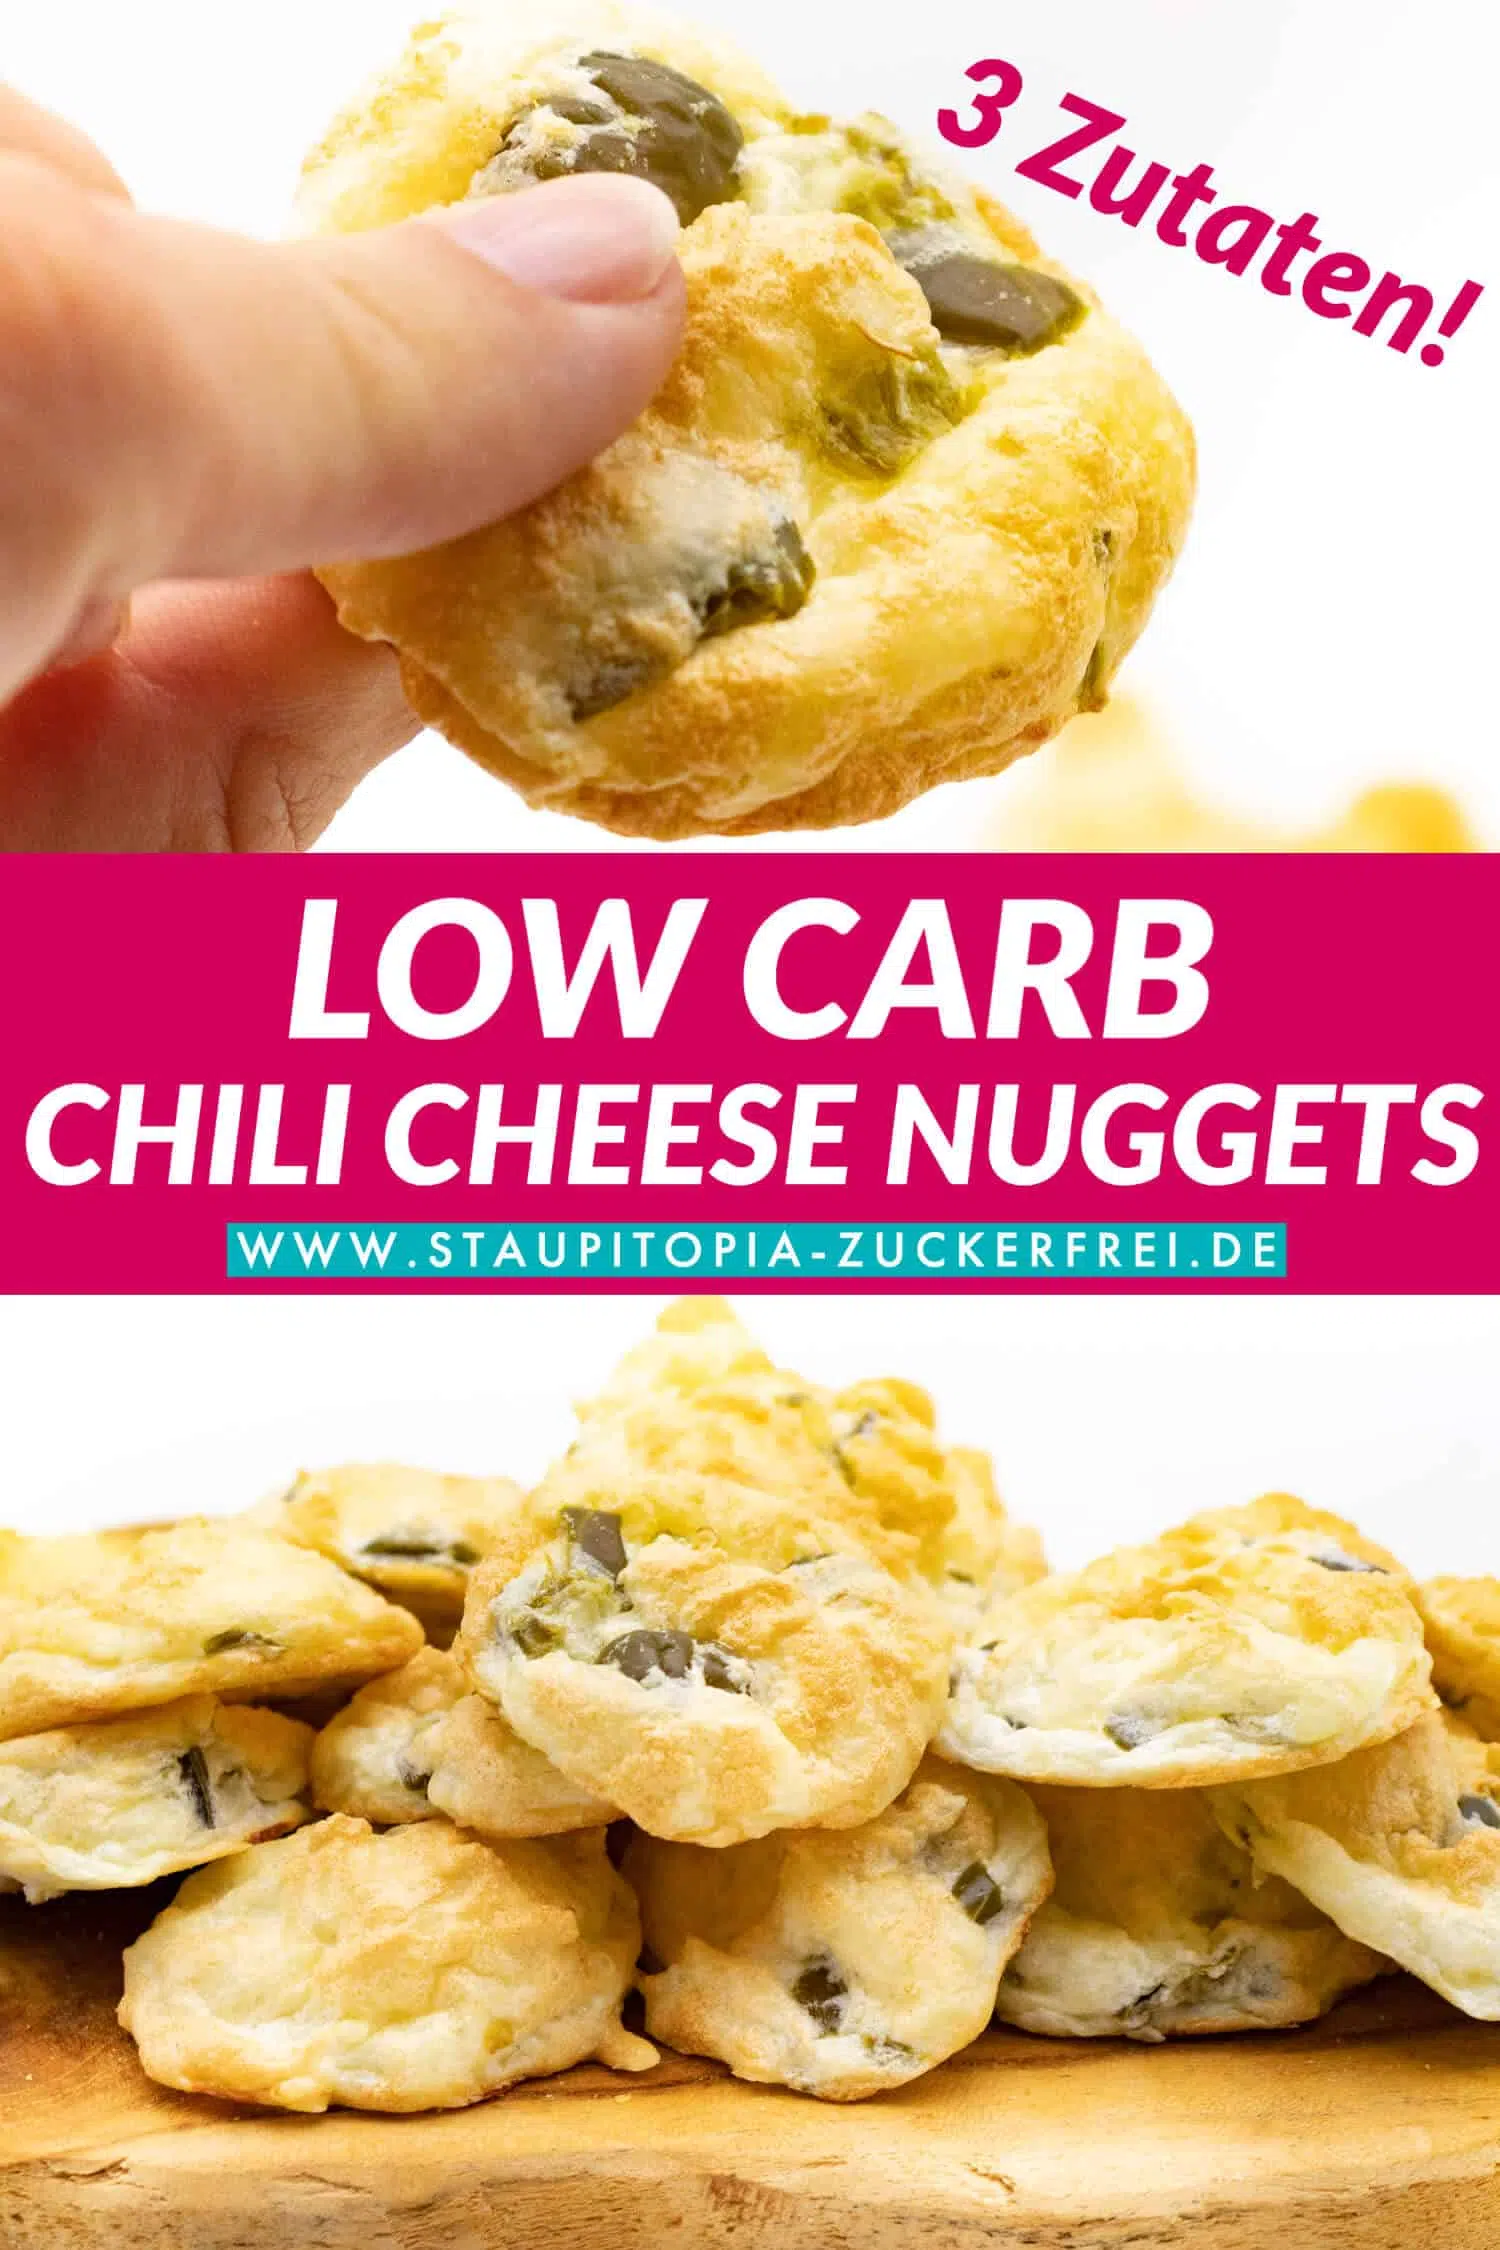 Low Carb Chili Cheese Nuggets selber machen ohne Kohlenhydrate